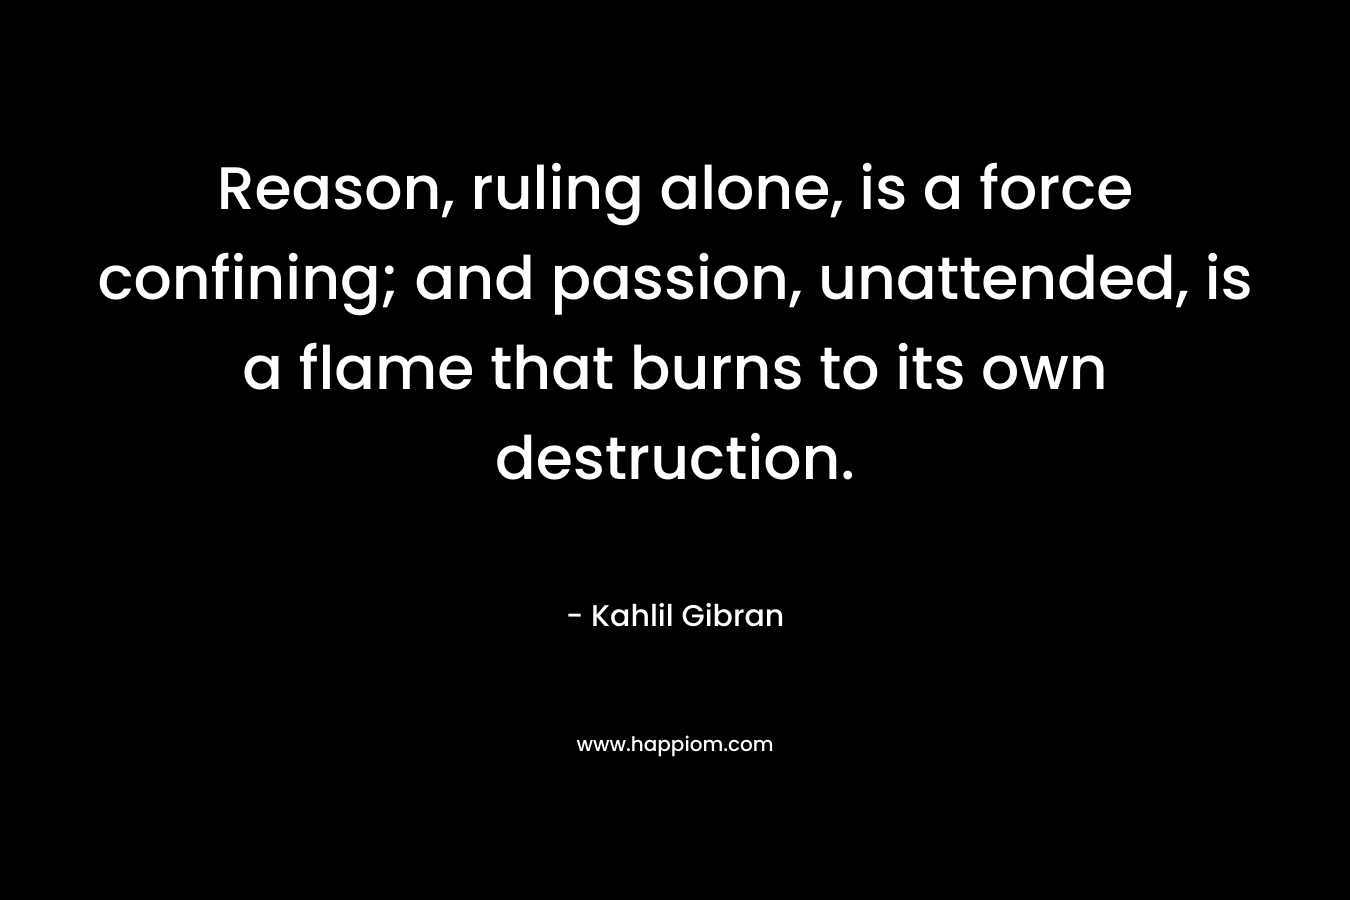 Reason, ruling alone, is a force confining; and passion, unattended, is a flame that burns to its own destruction.